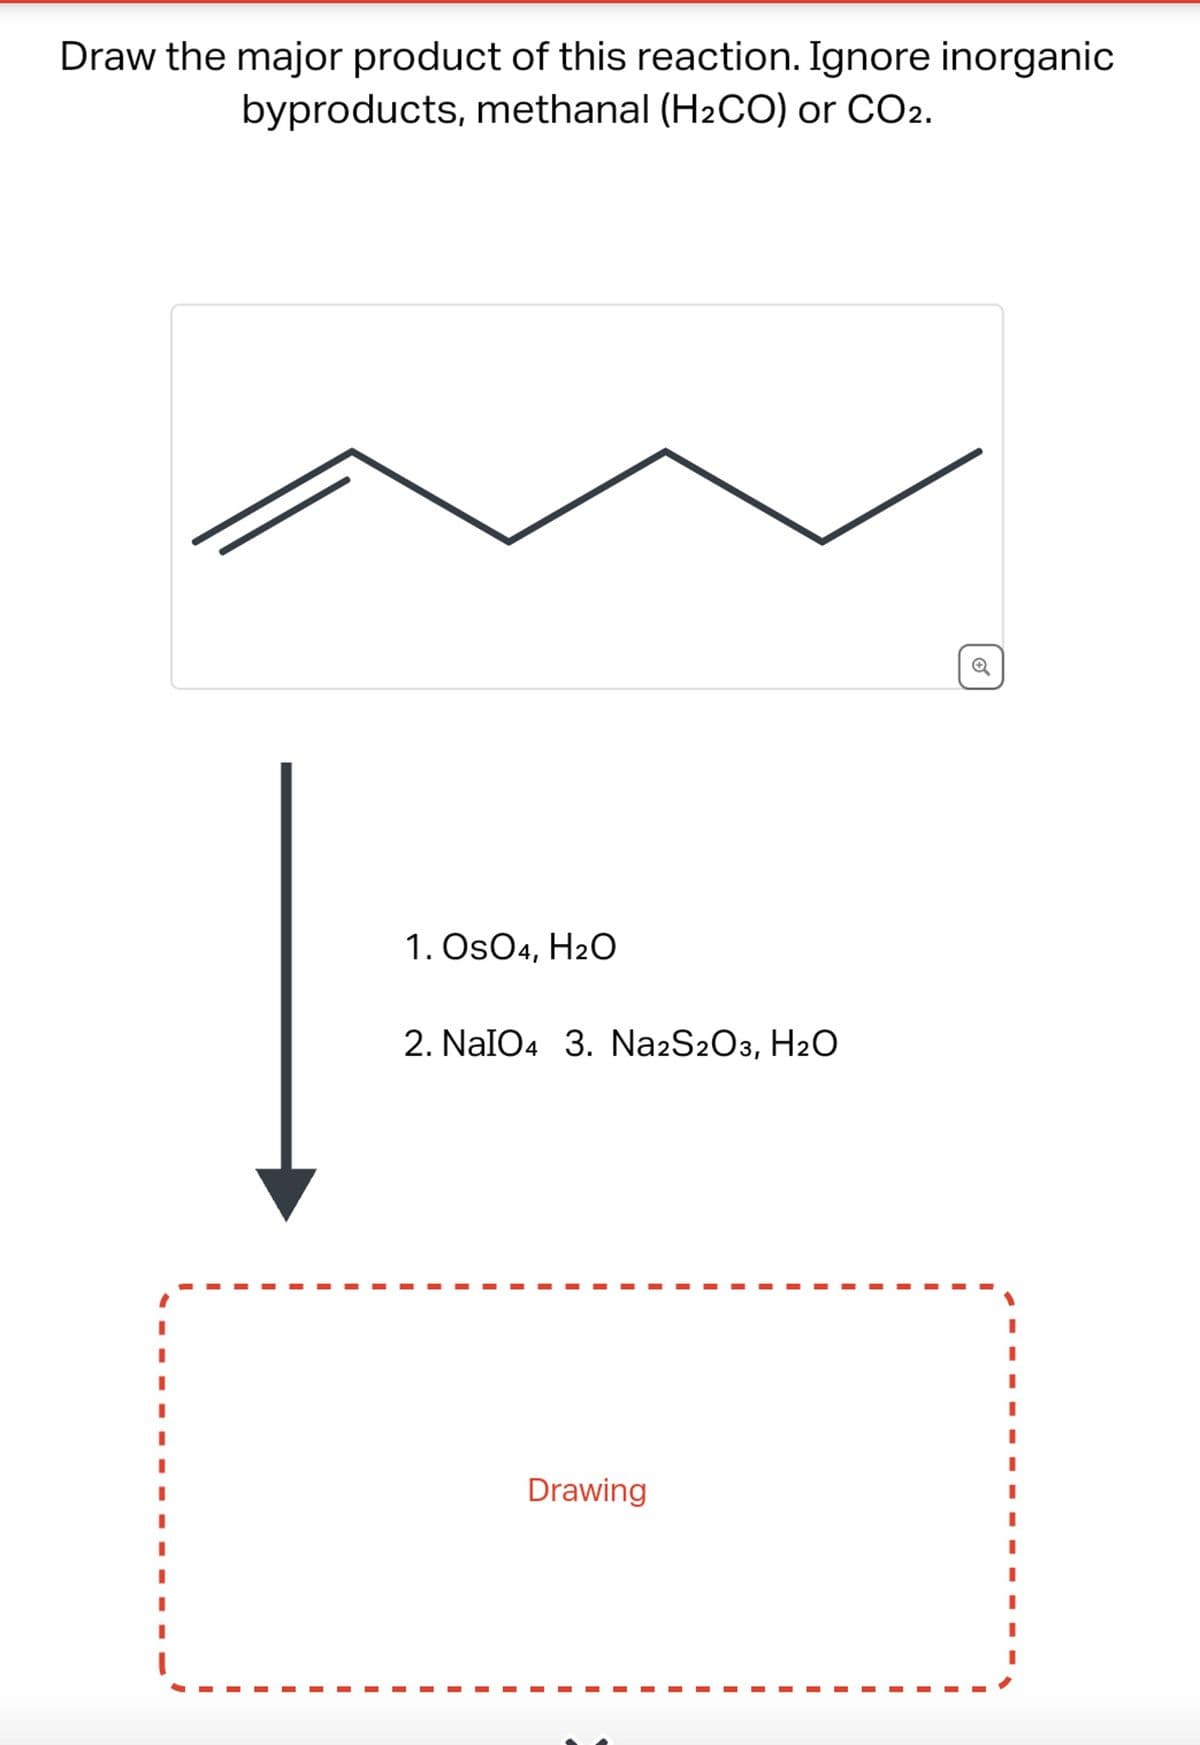 Draw the major product of this reaction. Ignore inorganic
byproducts, methanal (H₂CO) or CO2.
1. OSO4, H2O
2. NaIO4 3. Na2S2O3, H2O
Drawing
I
I